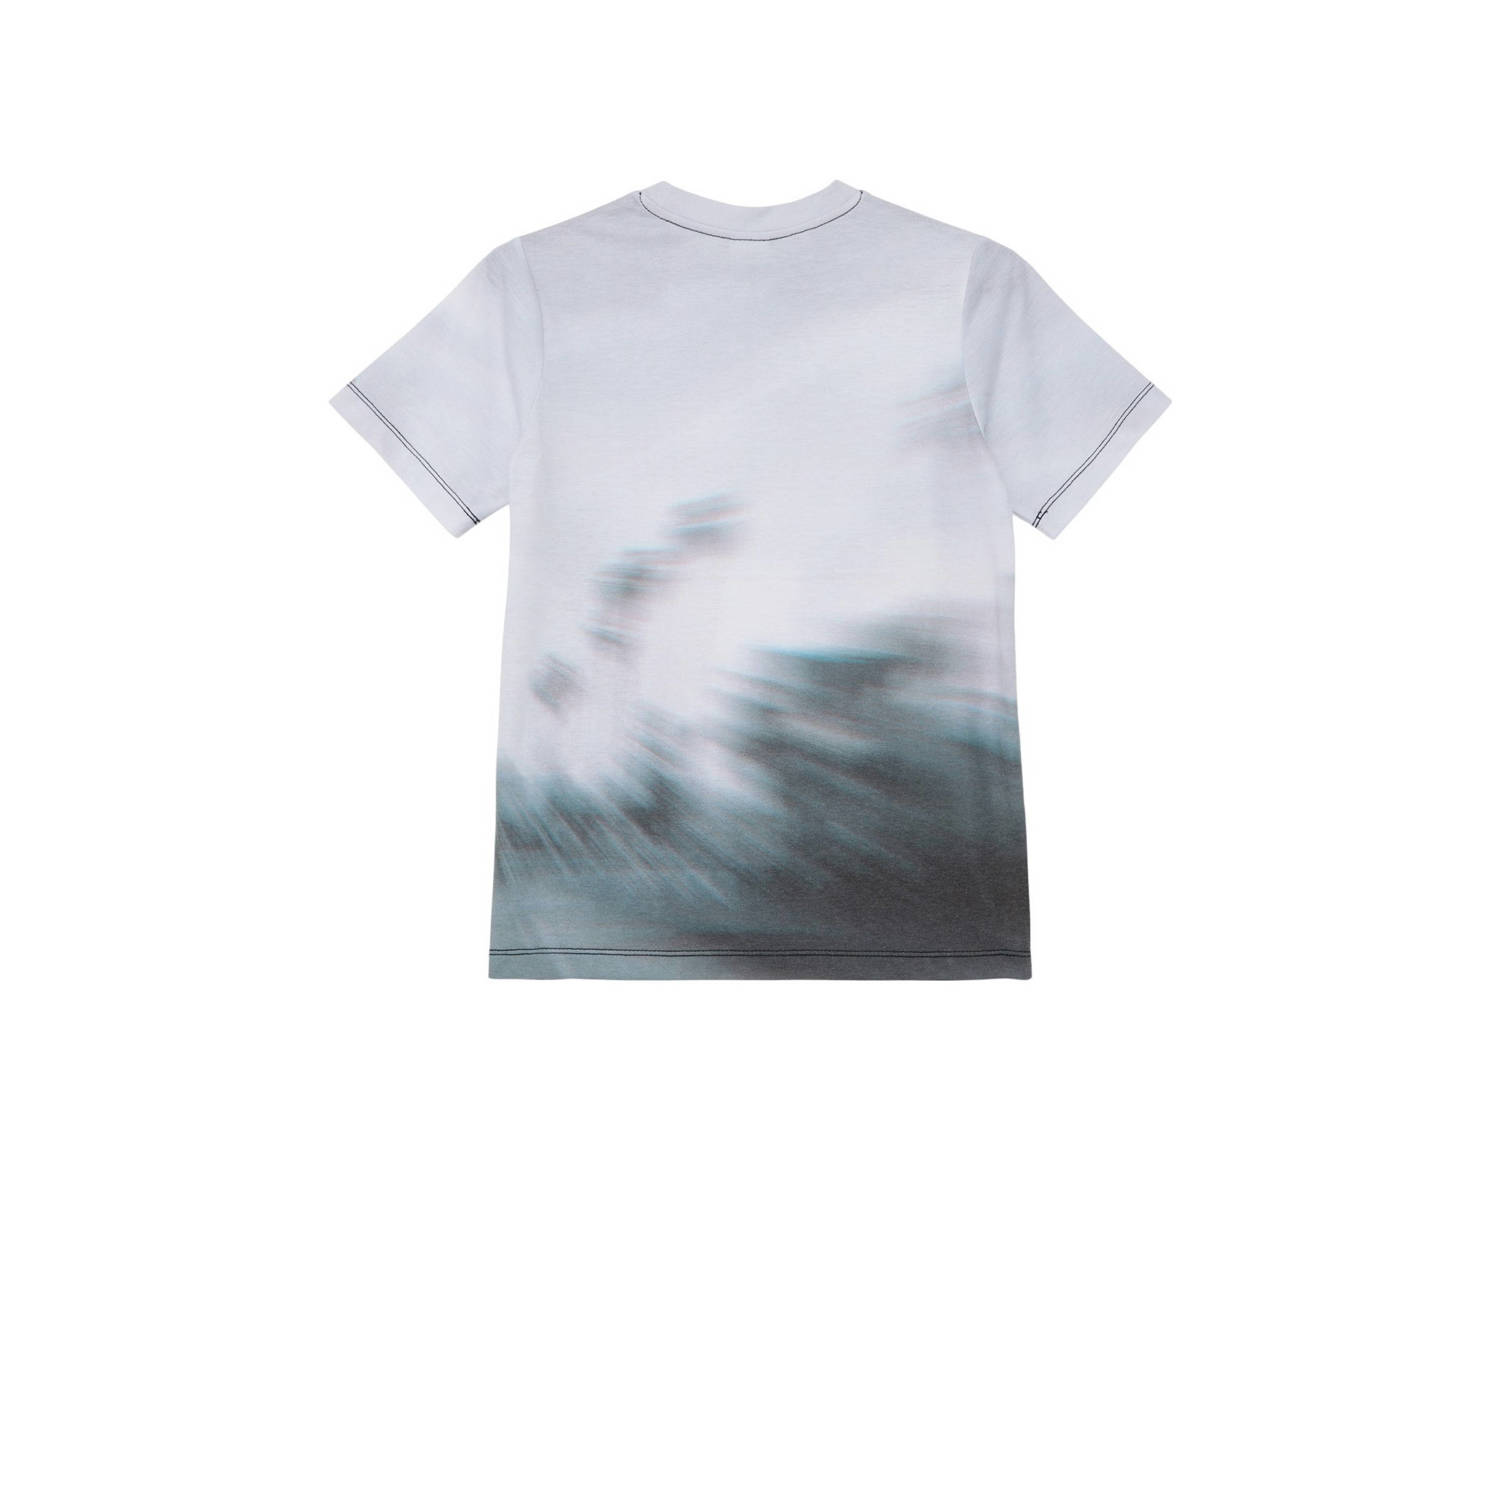 s.Oliver T-shirt met all over print wit